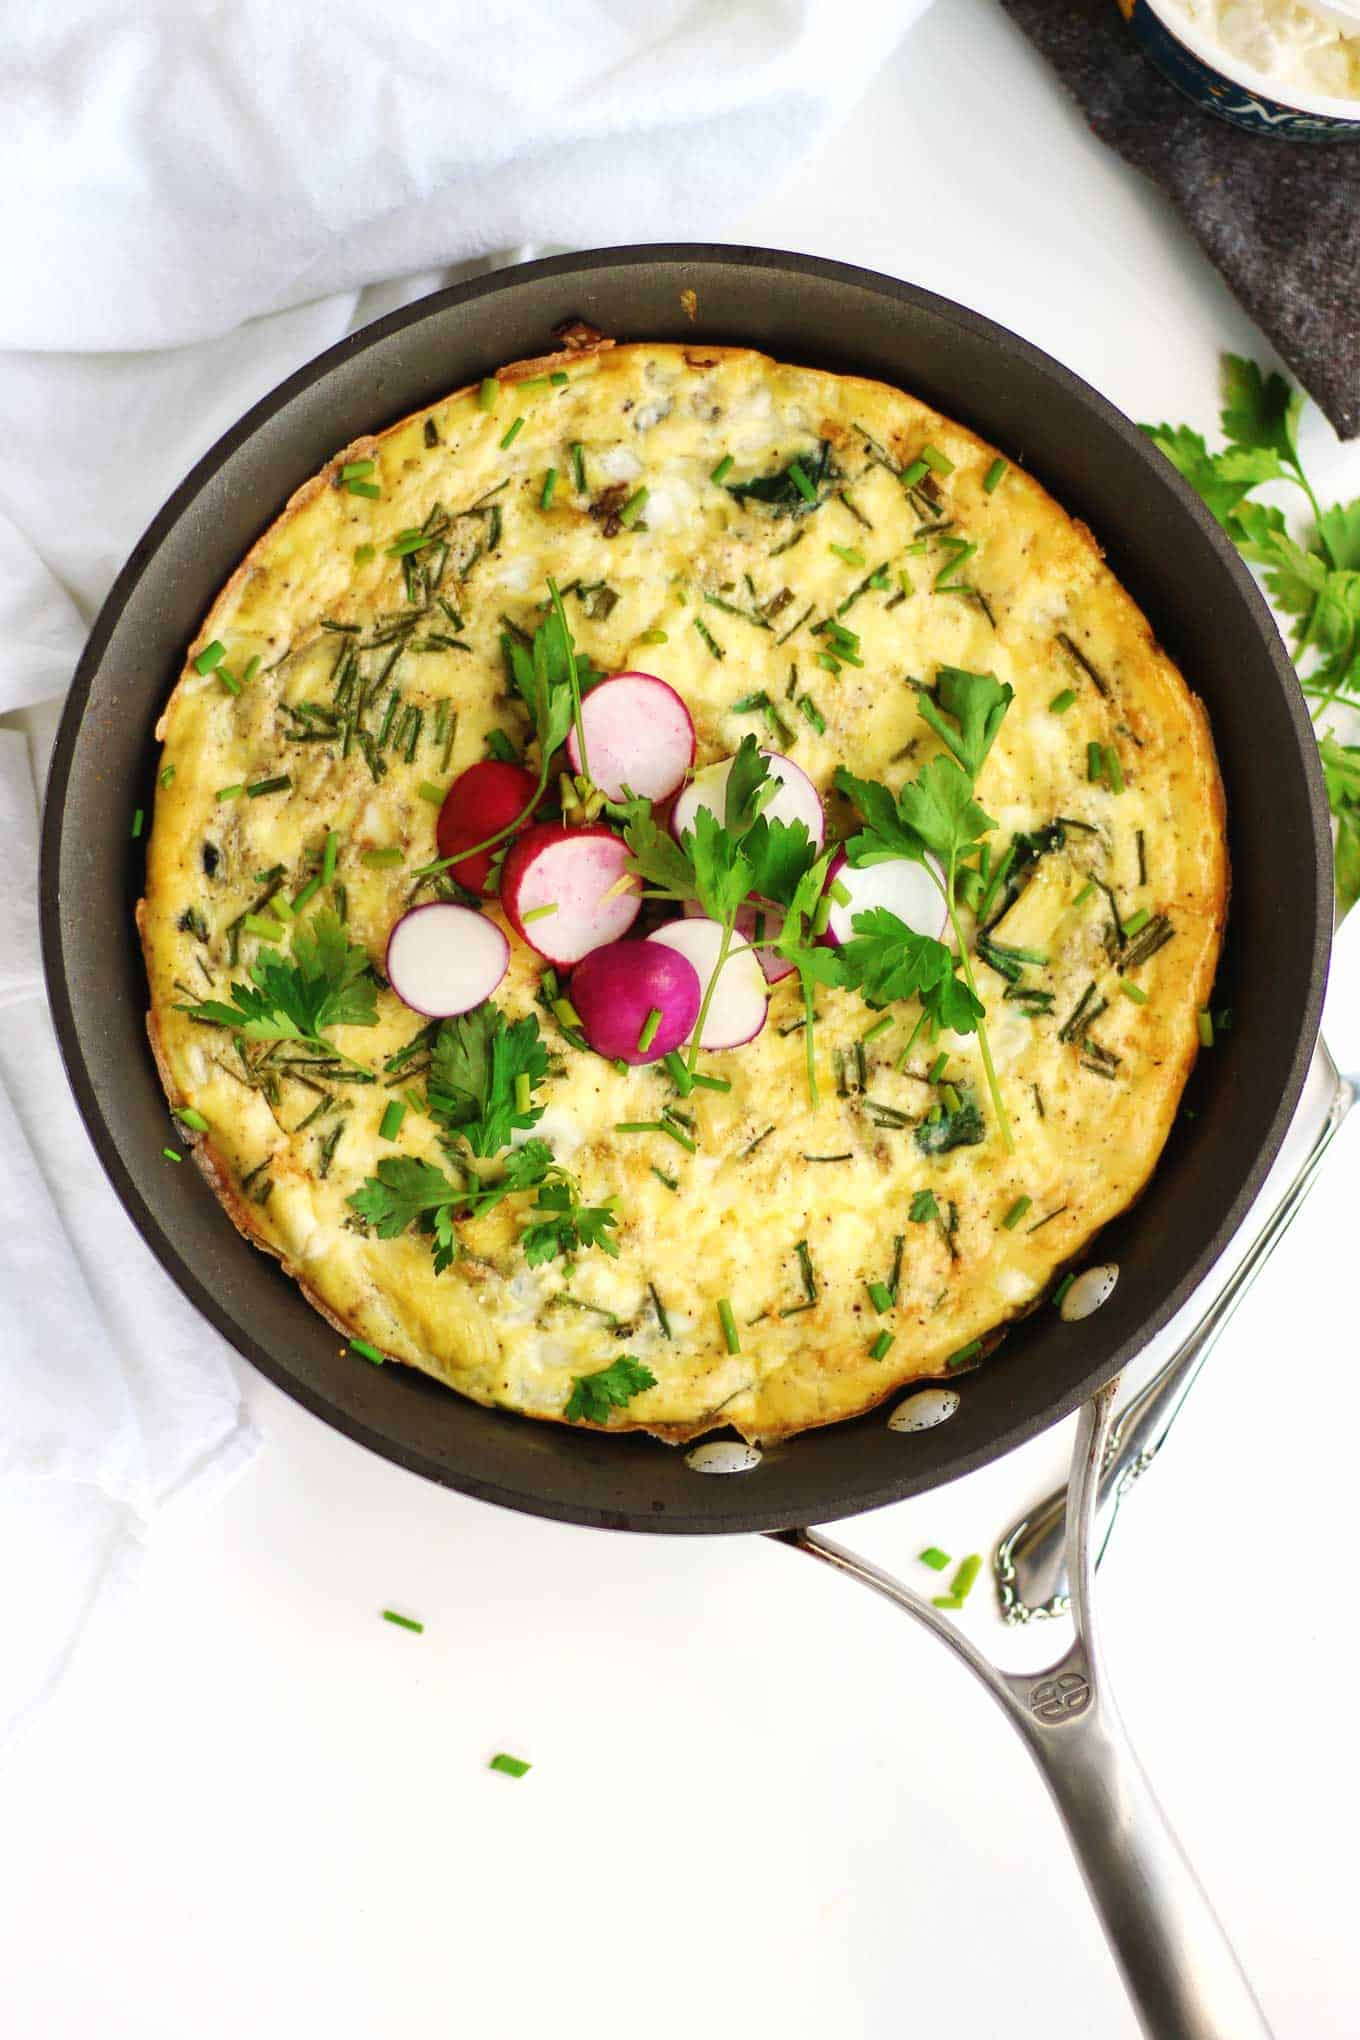 Spinach artichoke frittata in a pan with radishes on top